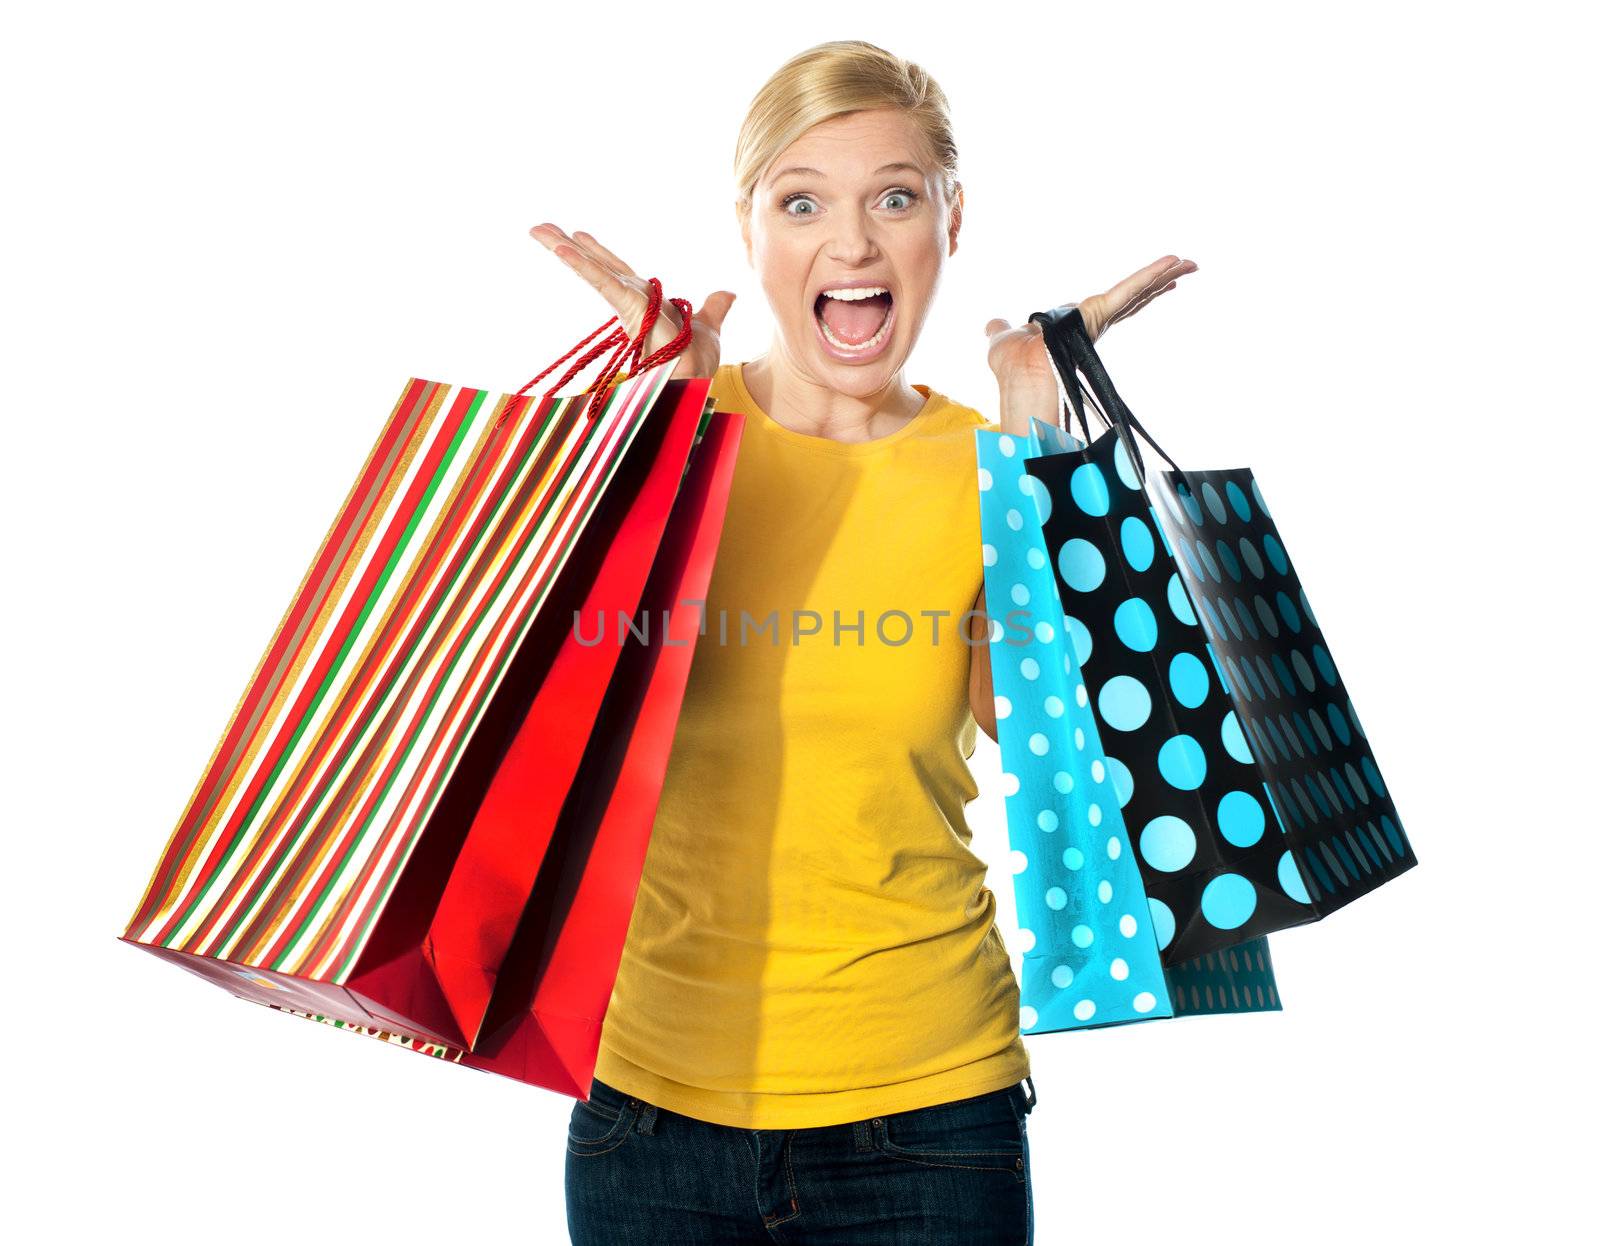 Young woman excited after tons of shopping. Expressing herself